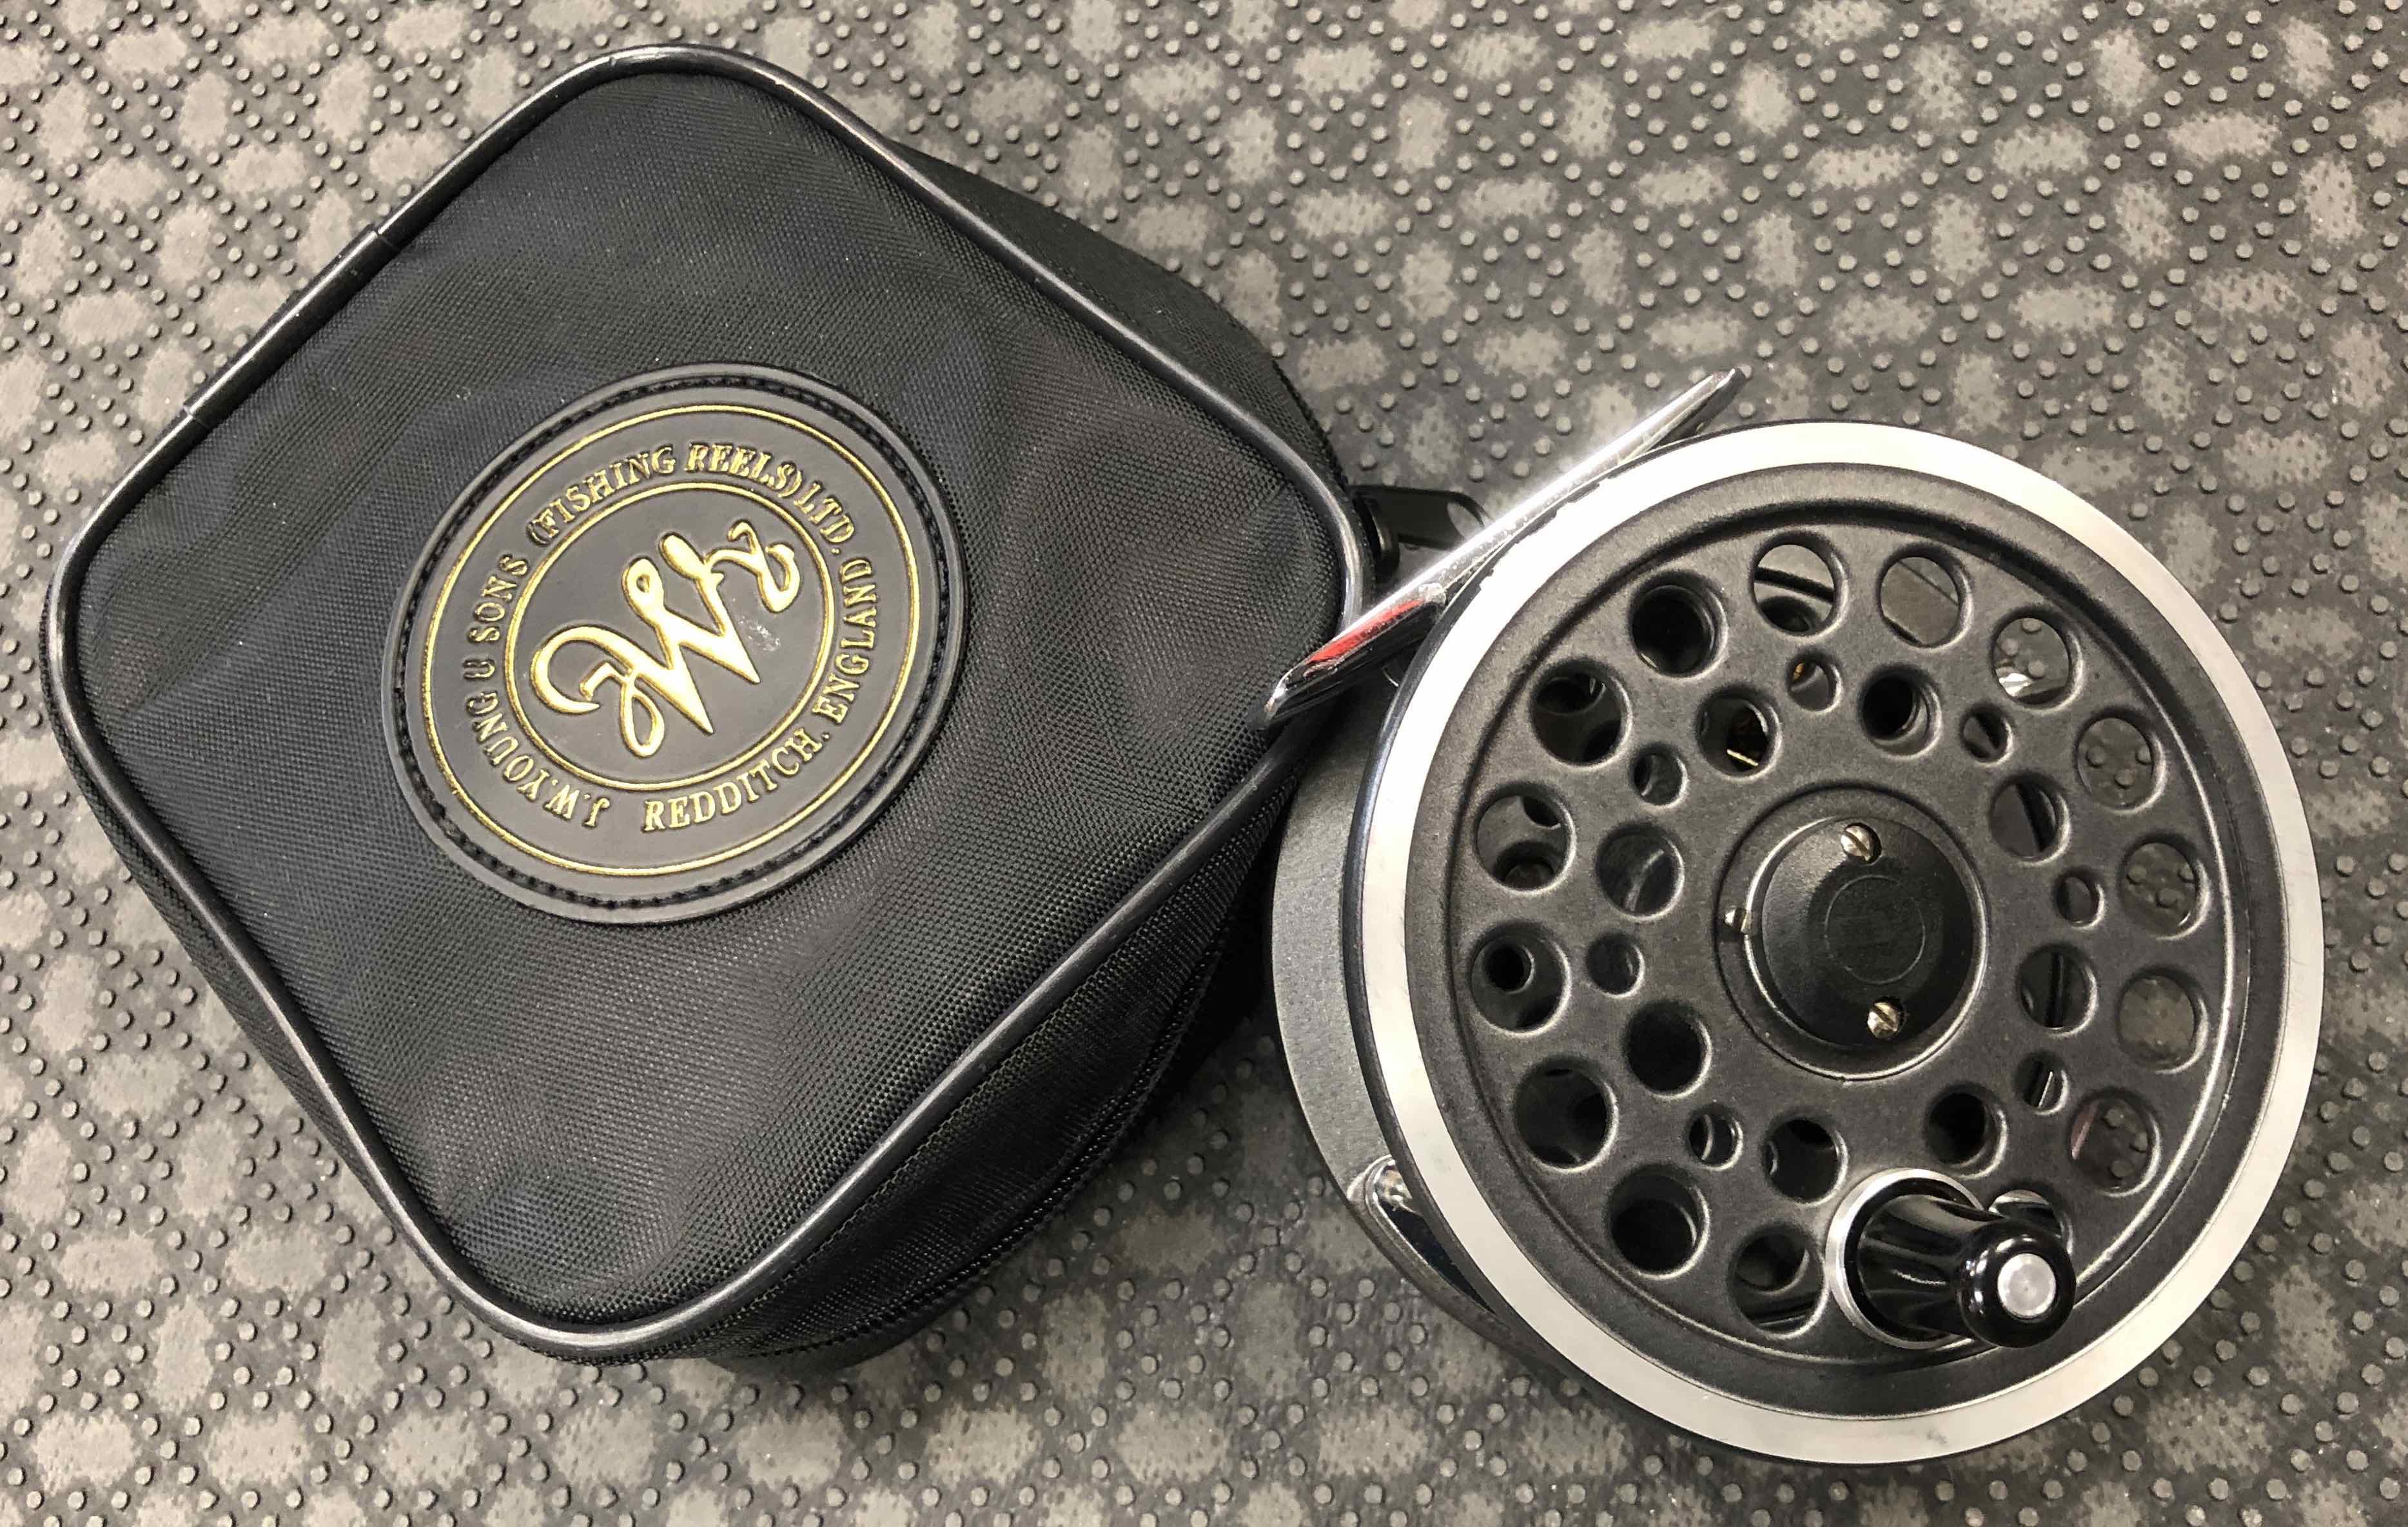 SOLD! – J.W. Young & Sons Ltd. Fly Reel – Redditch England – 1540